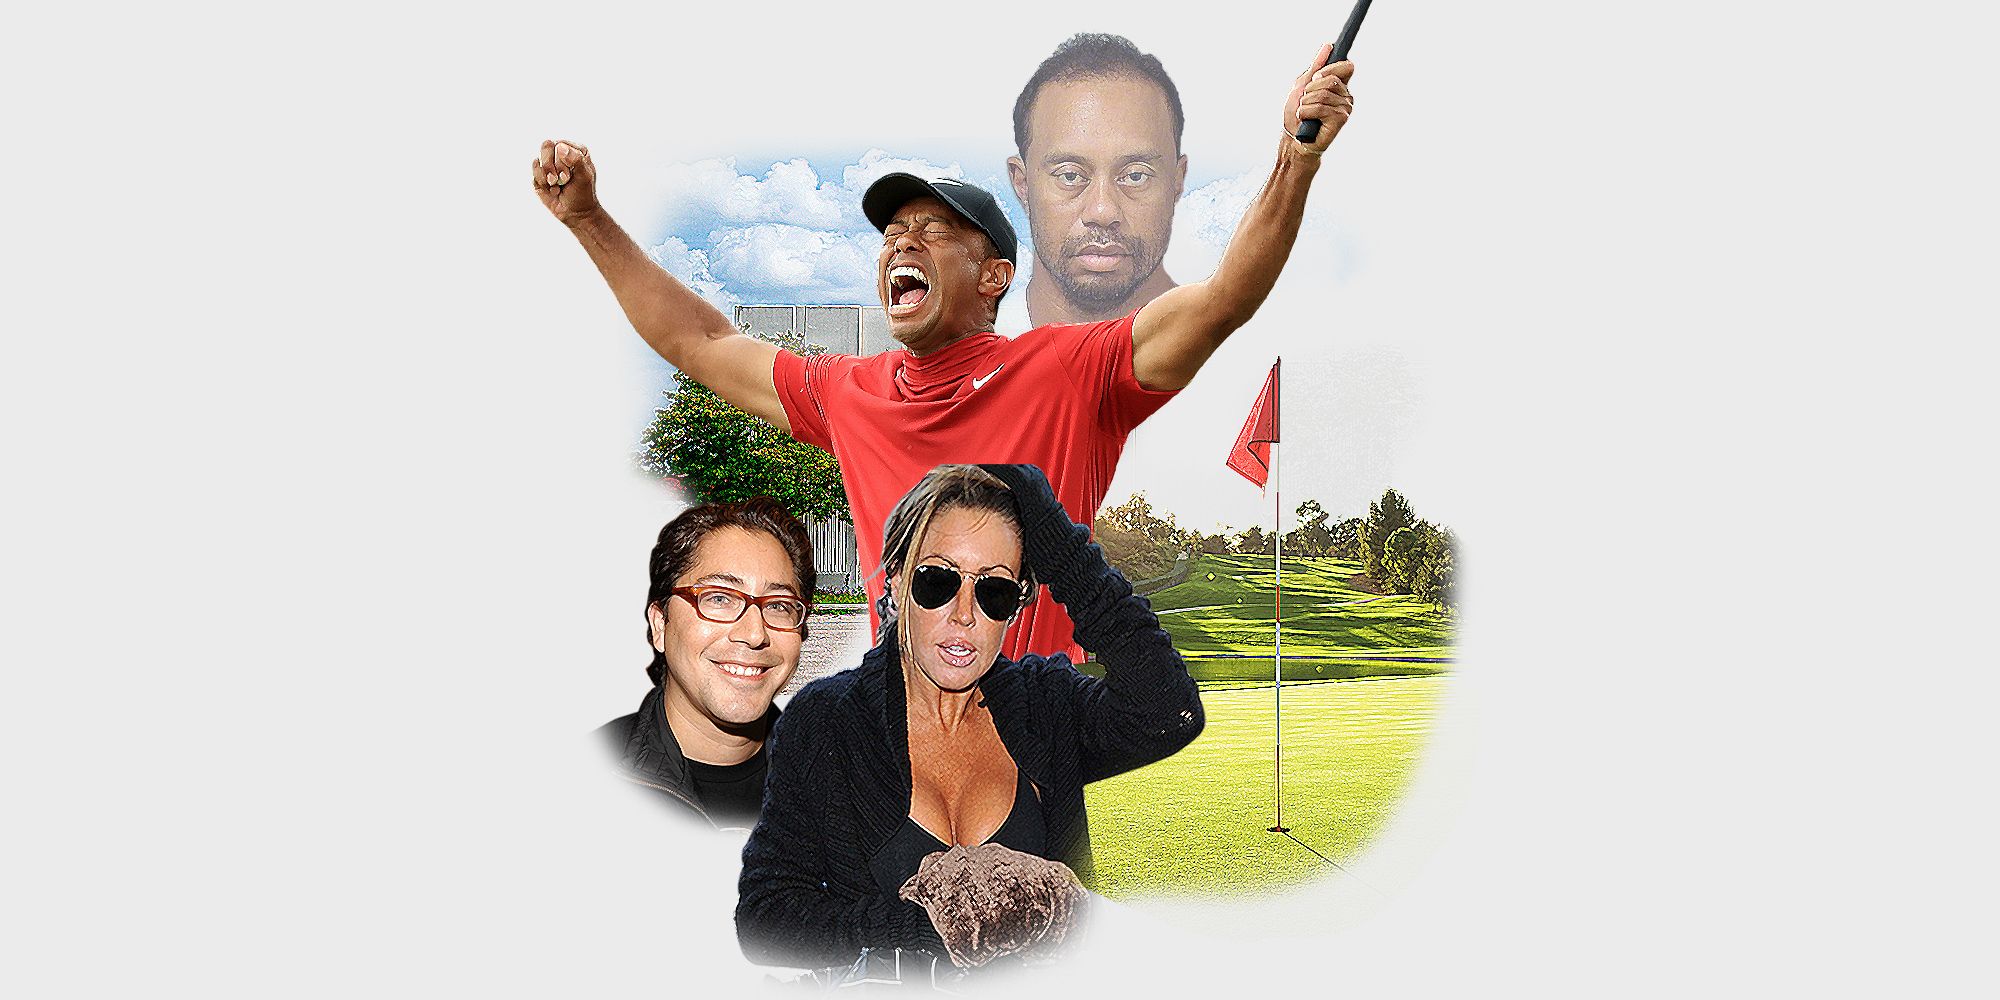 Tiger Woods HBO Documentary Tiger Details His Sex Scandal, Mistresses, Relationships picture